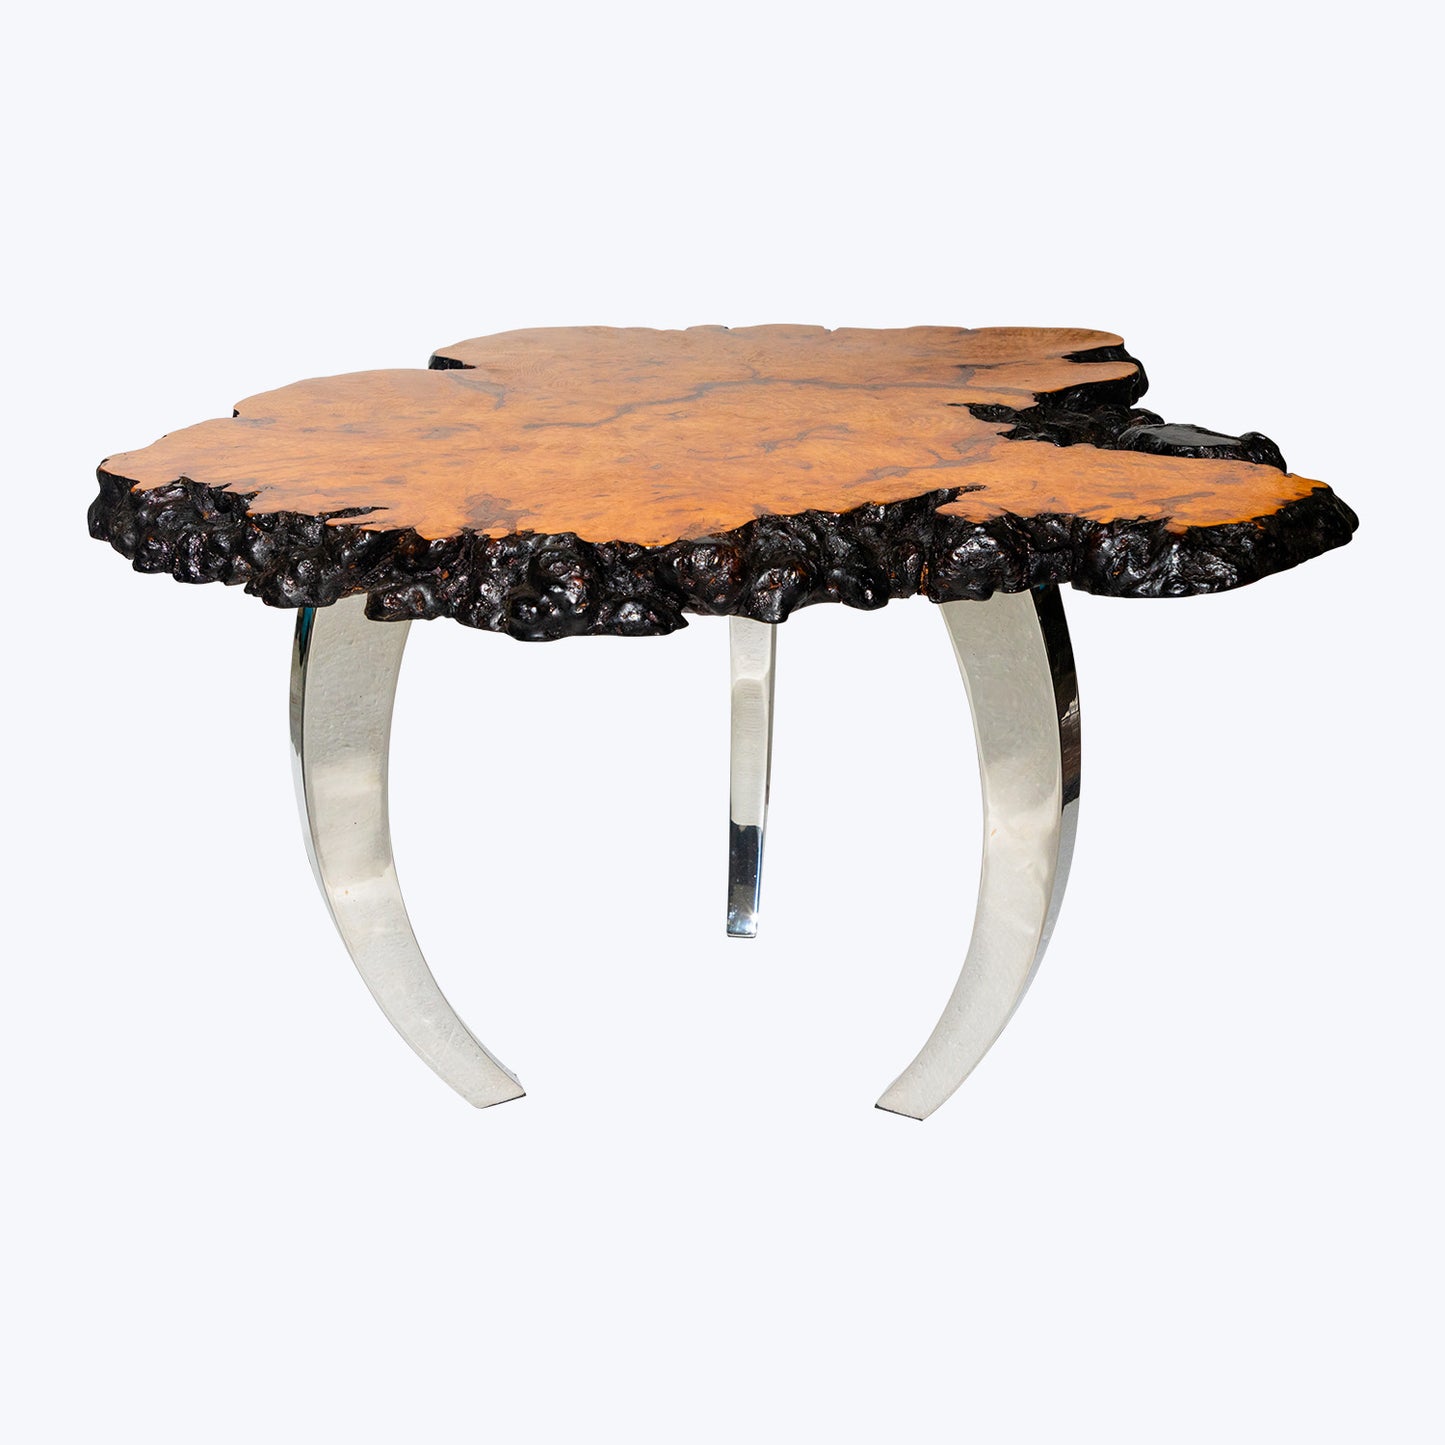 Japanese Burl Wood Table with Stainless Legs #M